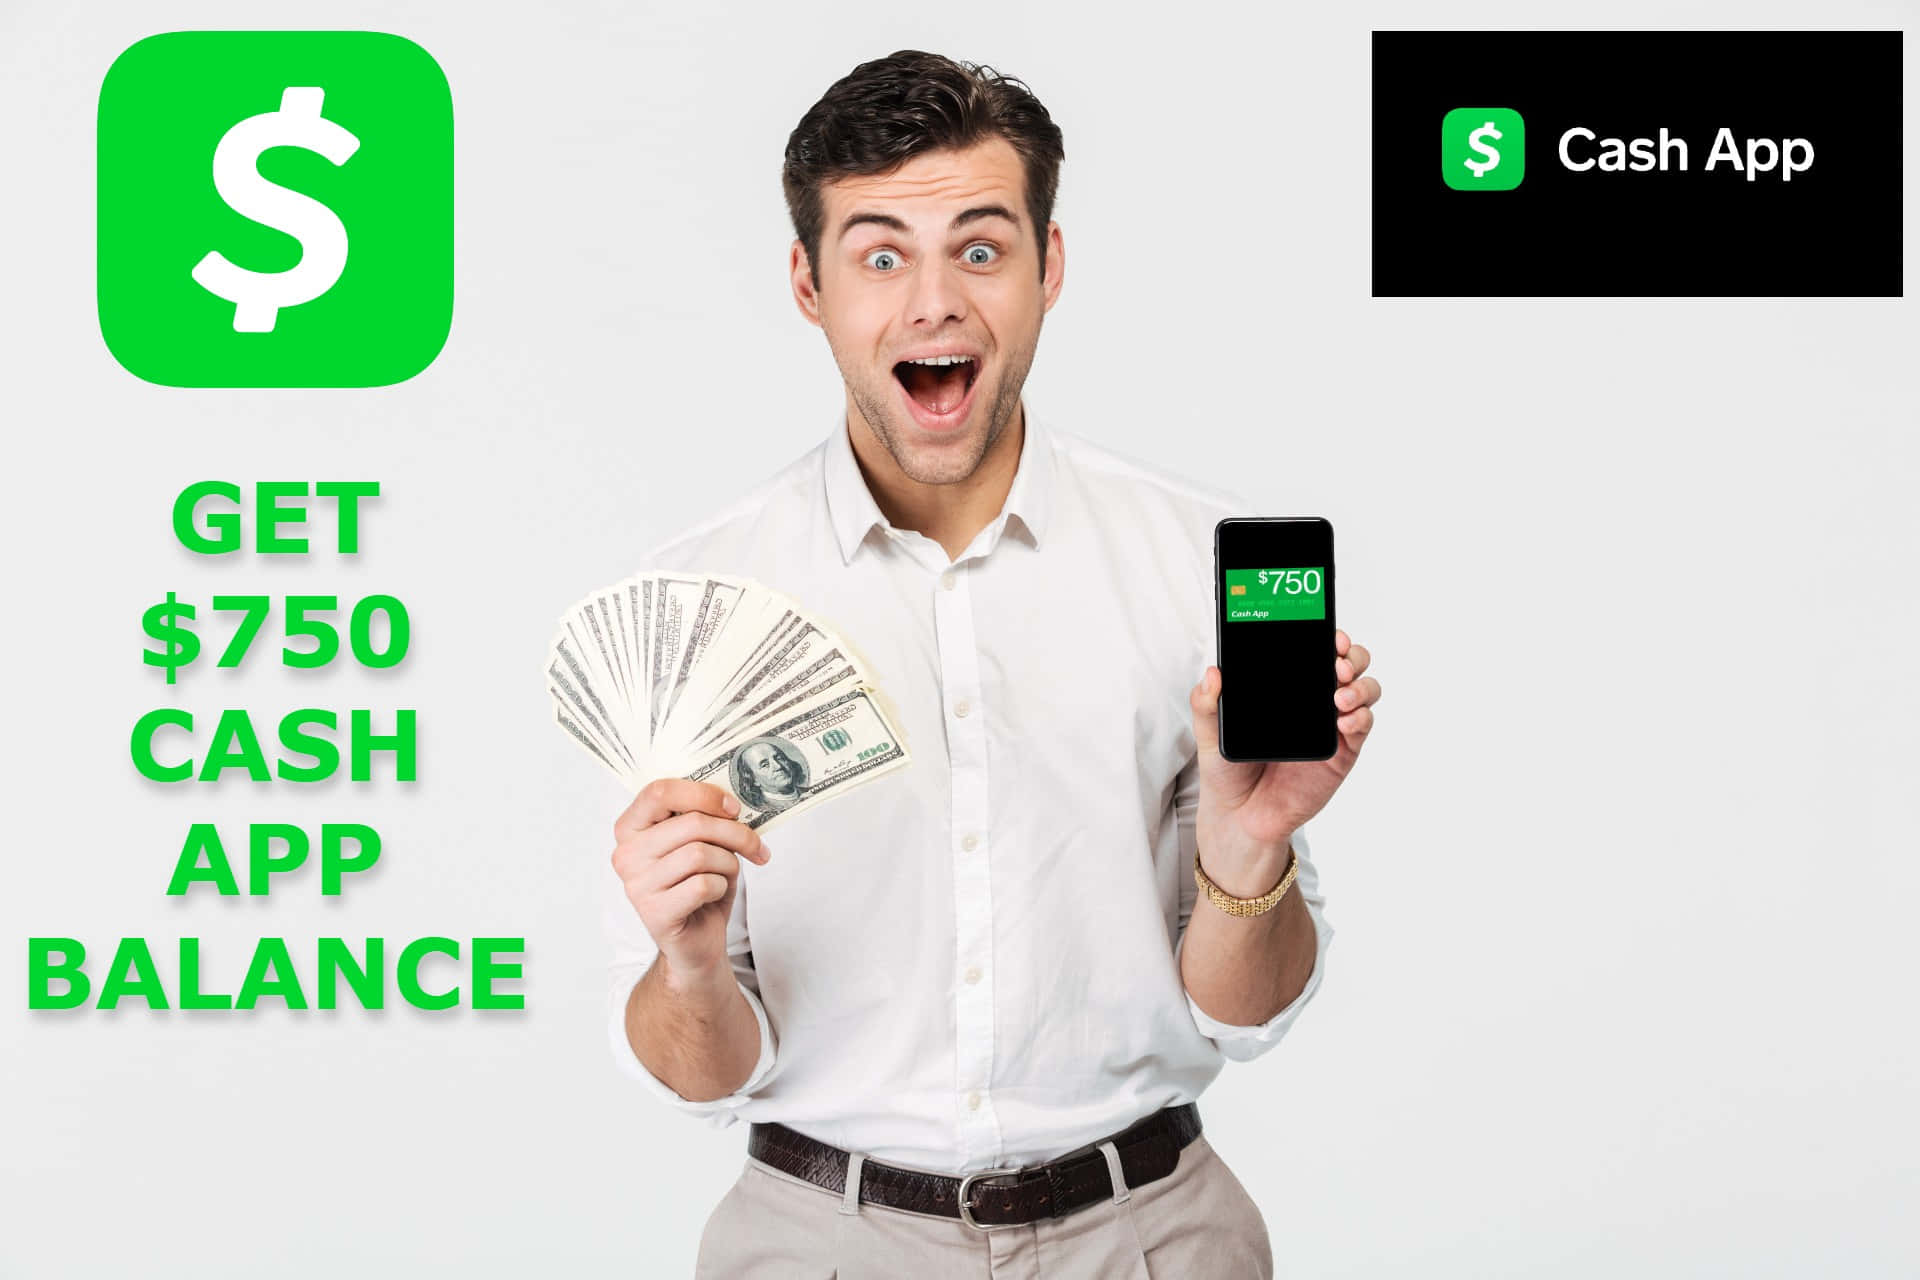 Easily Check and Manage Your Cash App Balance